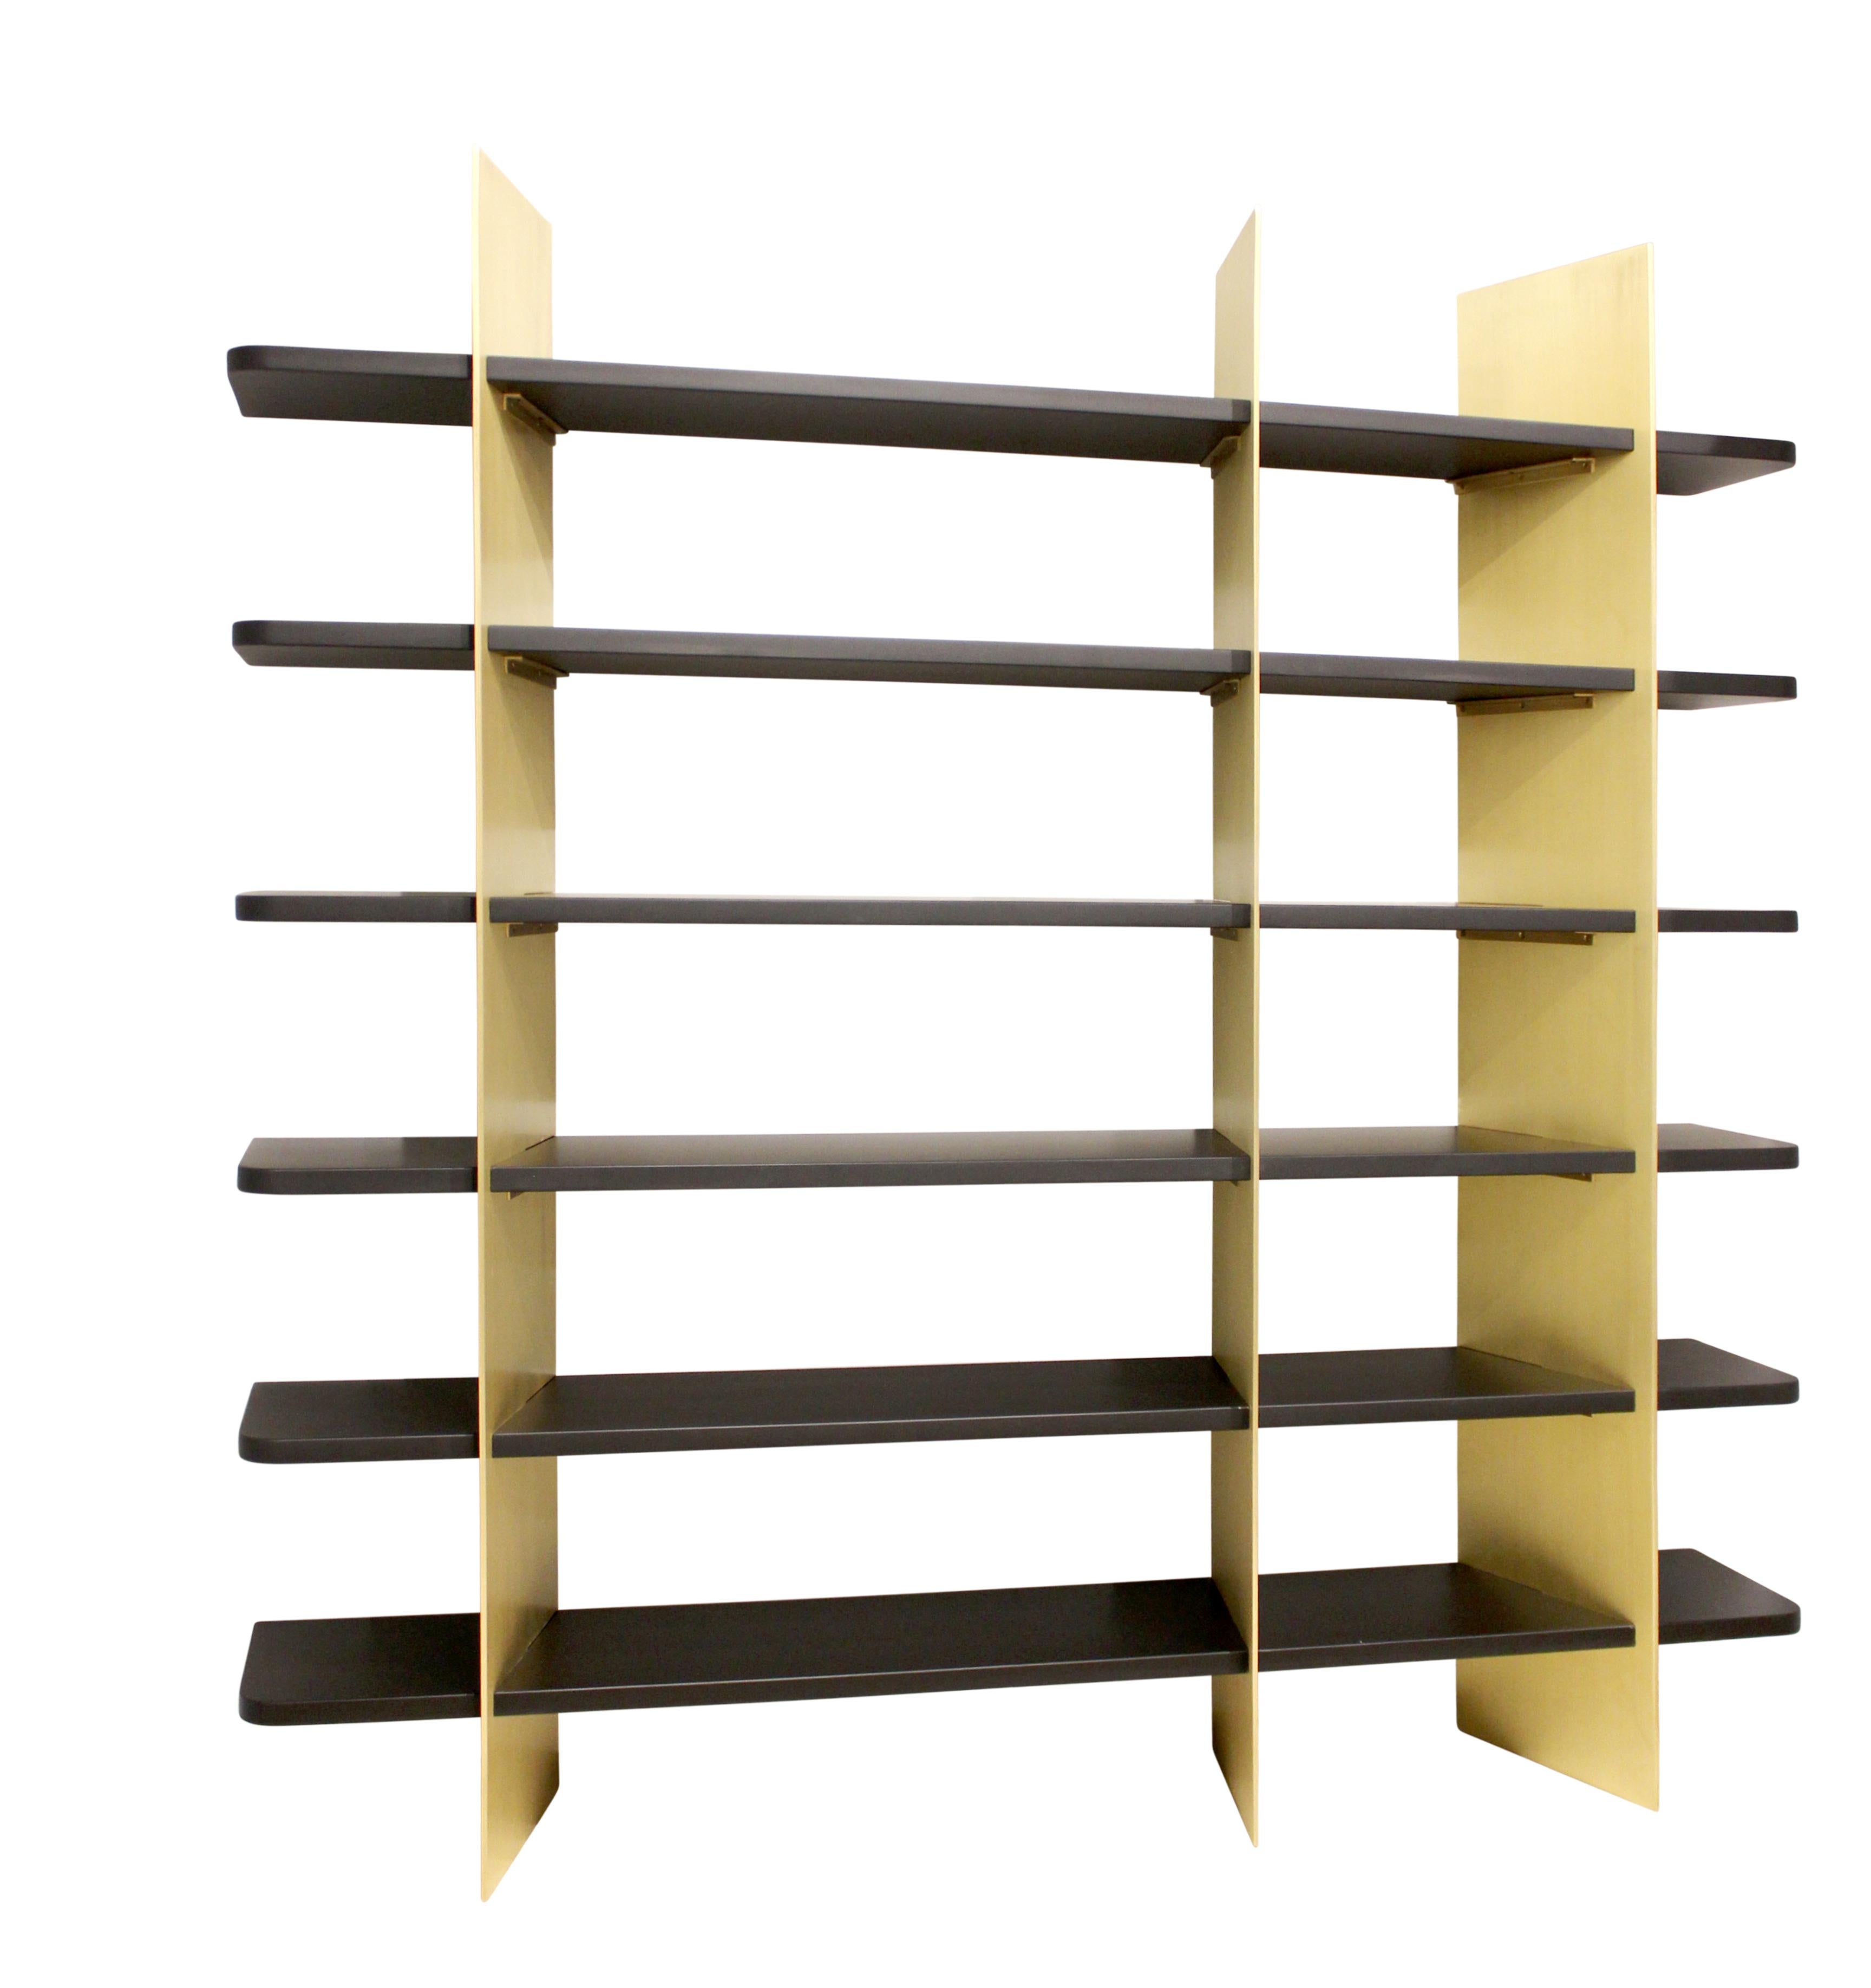 Dramatic brass and matte lacquered wood bookcase. Slotted wood and metal components fit together to form a shelving unit of striking contrast. Custom sizes, materials, and finishes available.